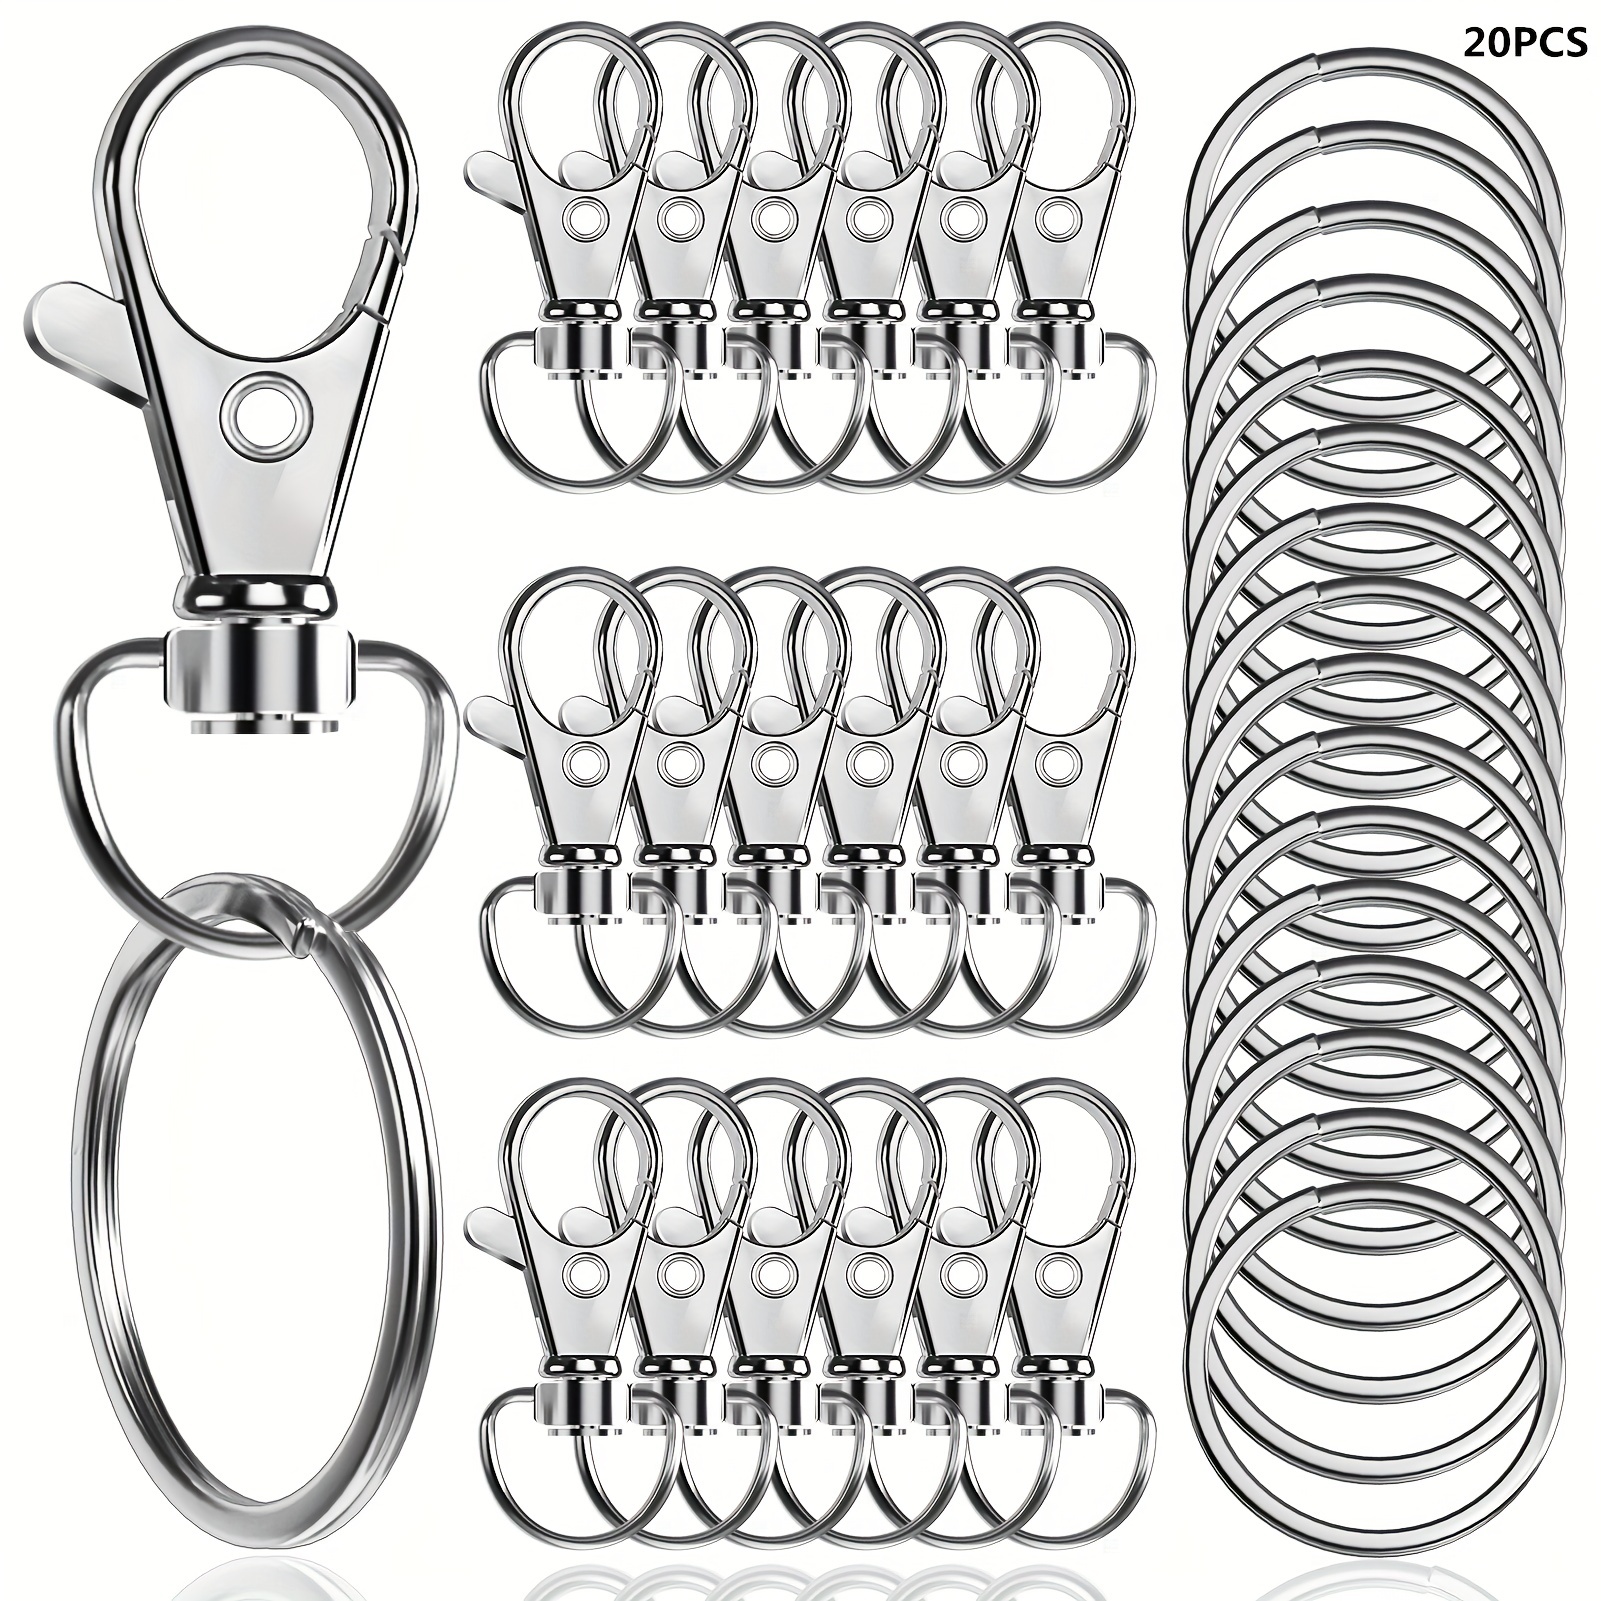 60pcs Keychain Lanyard Clips, Lanyard Hooks, 1.26 In Premium Clasps Hooks  Closures Snap Hooks Small For Crafts Lanyards Metal Key Chain Ring Making Je